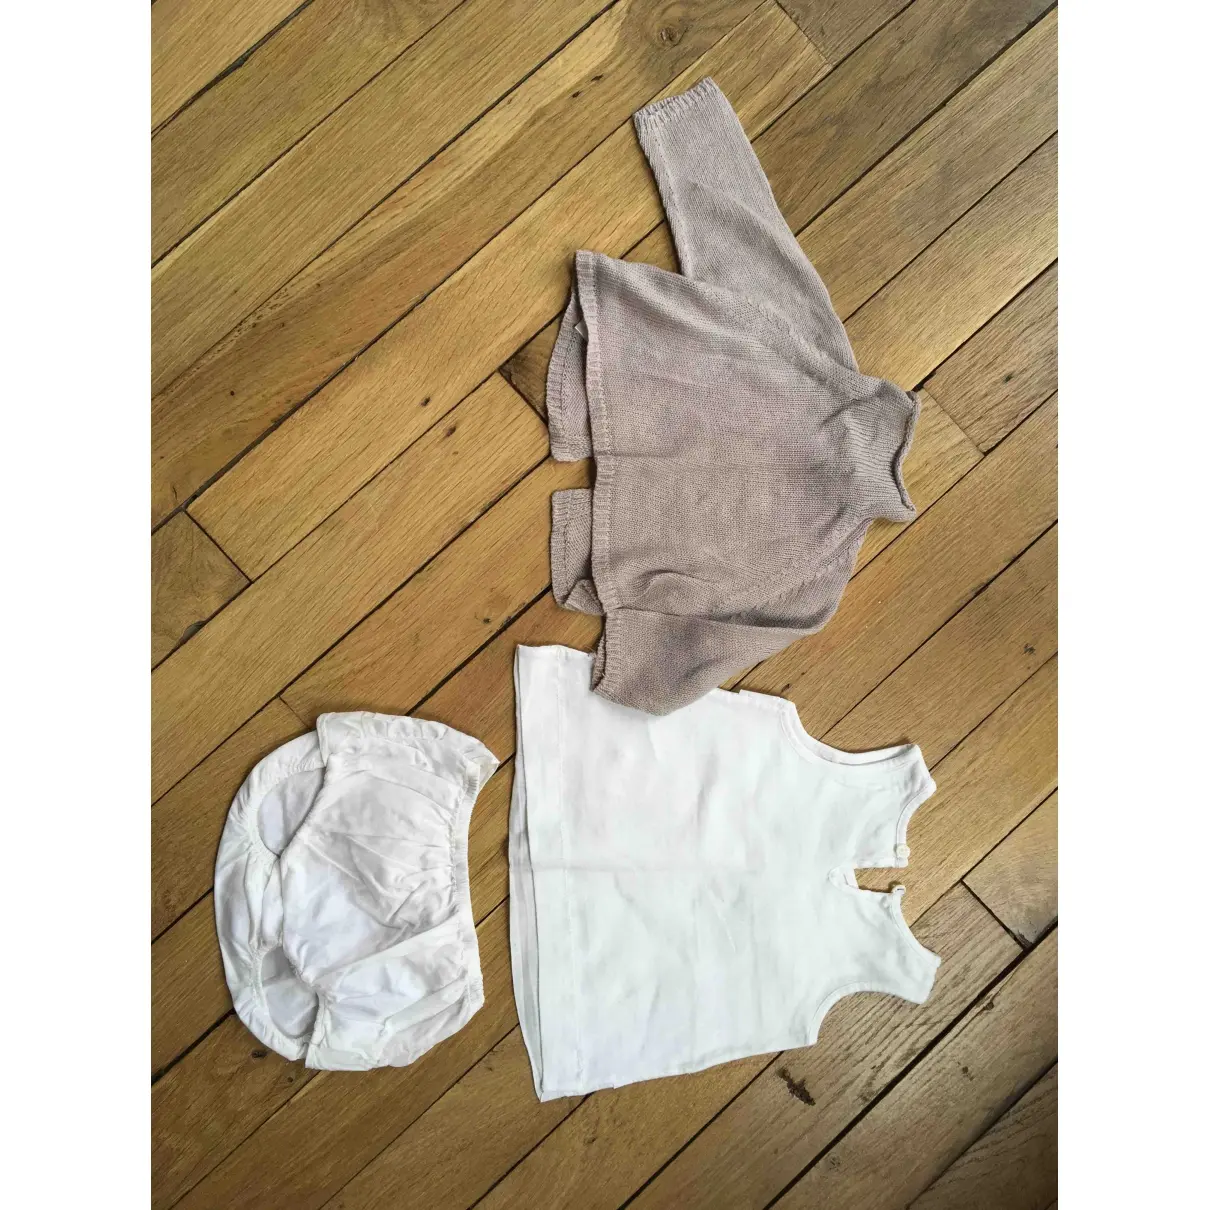 Chloé Outfit for sale